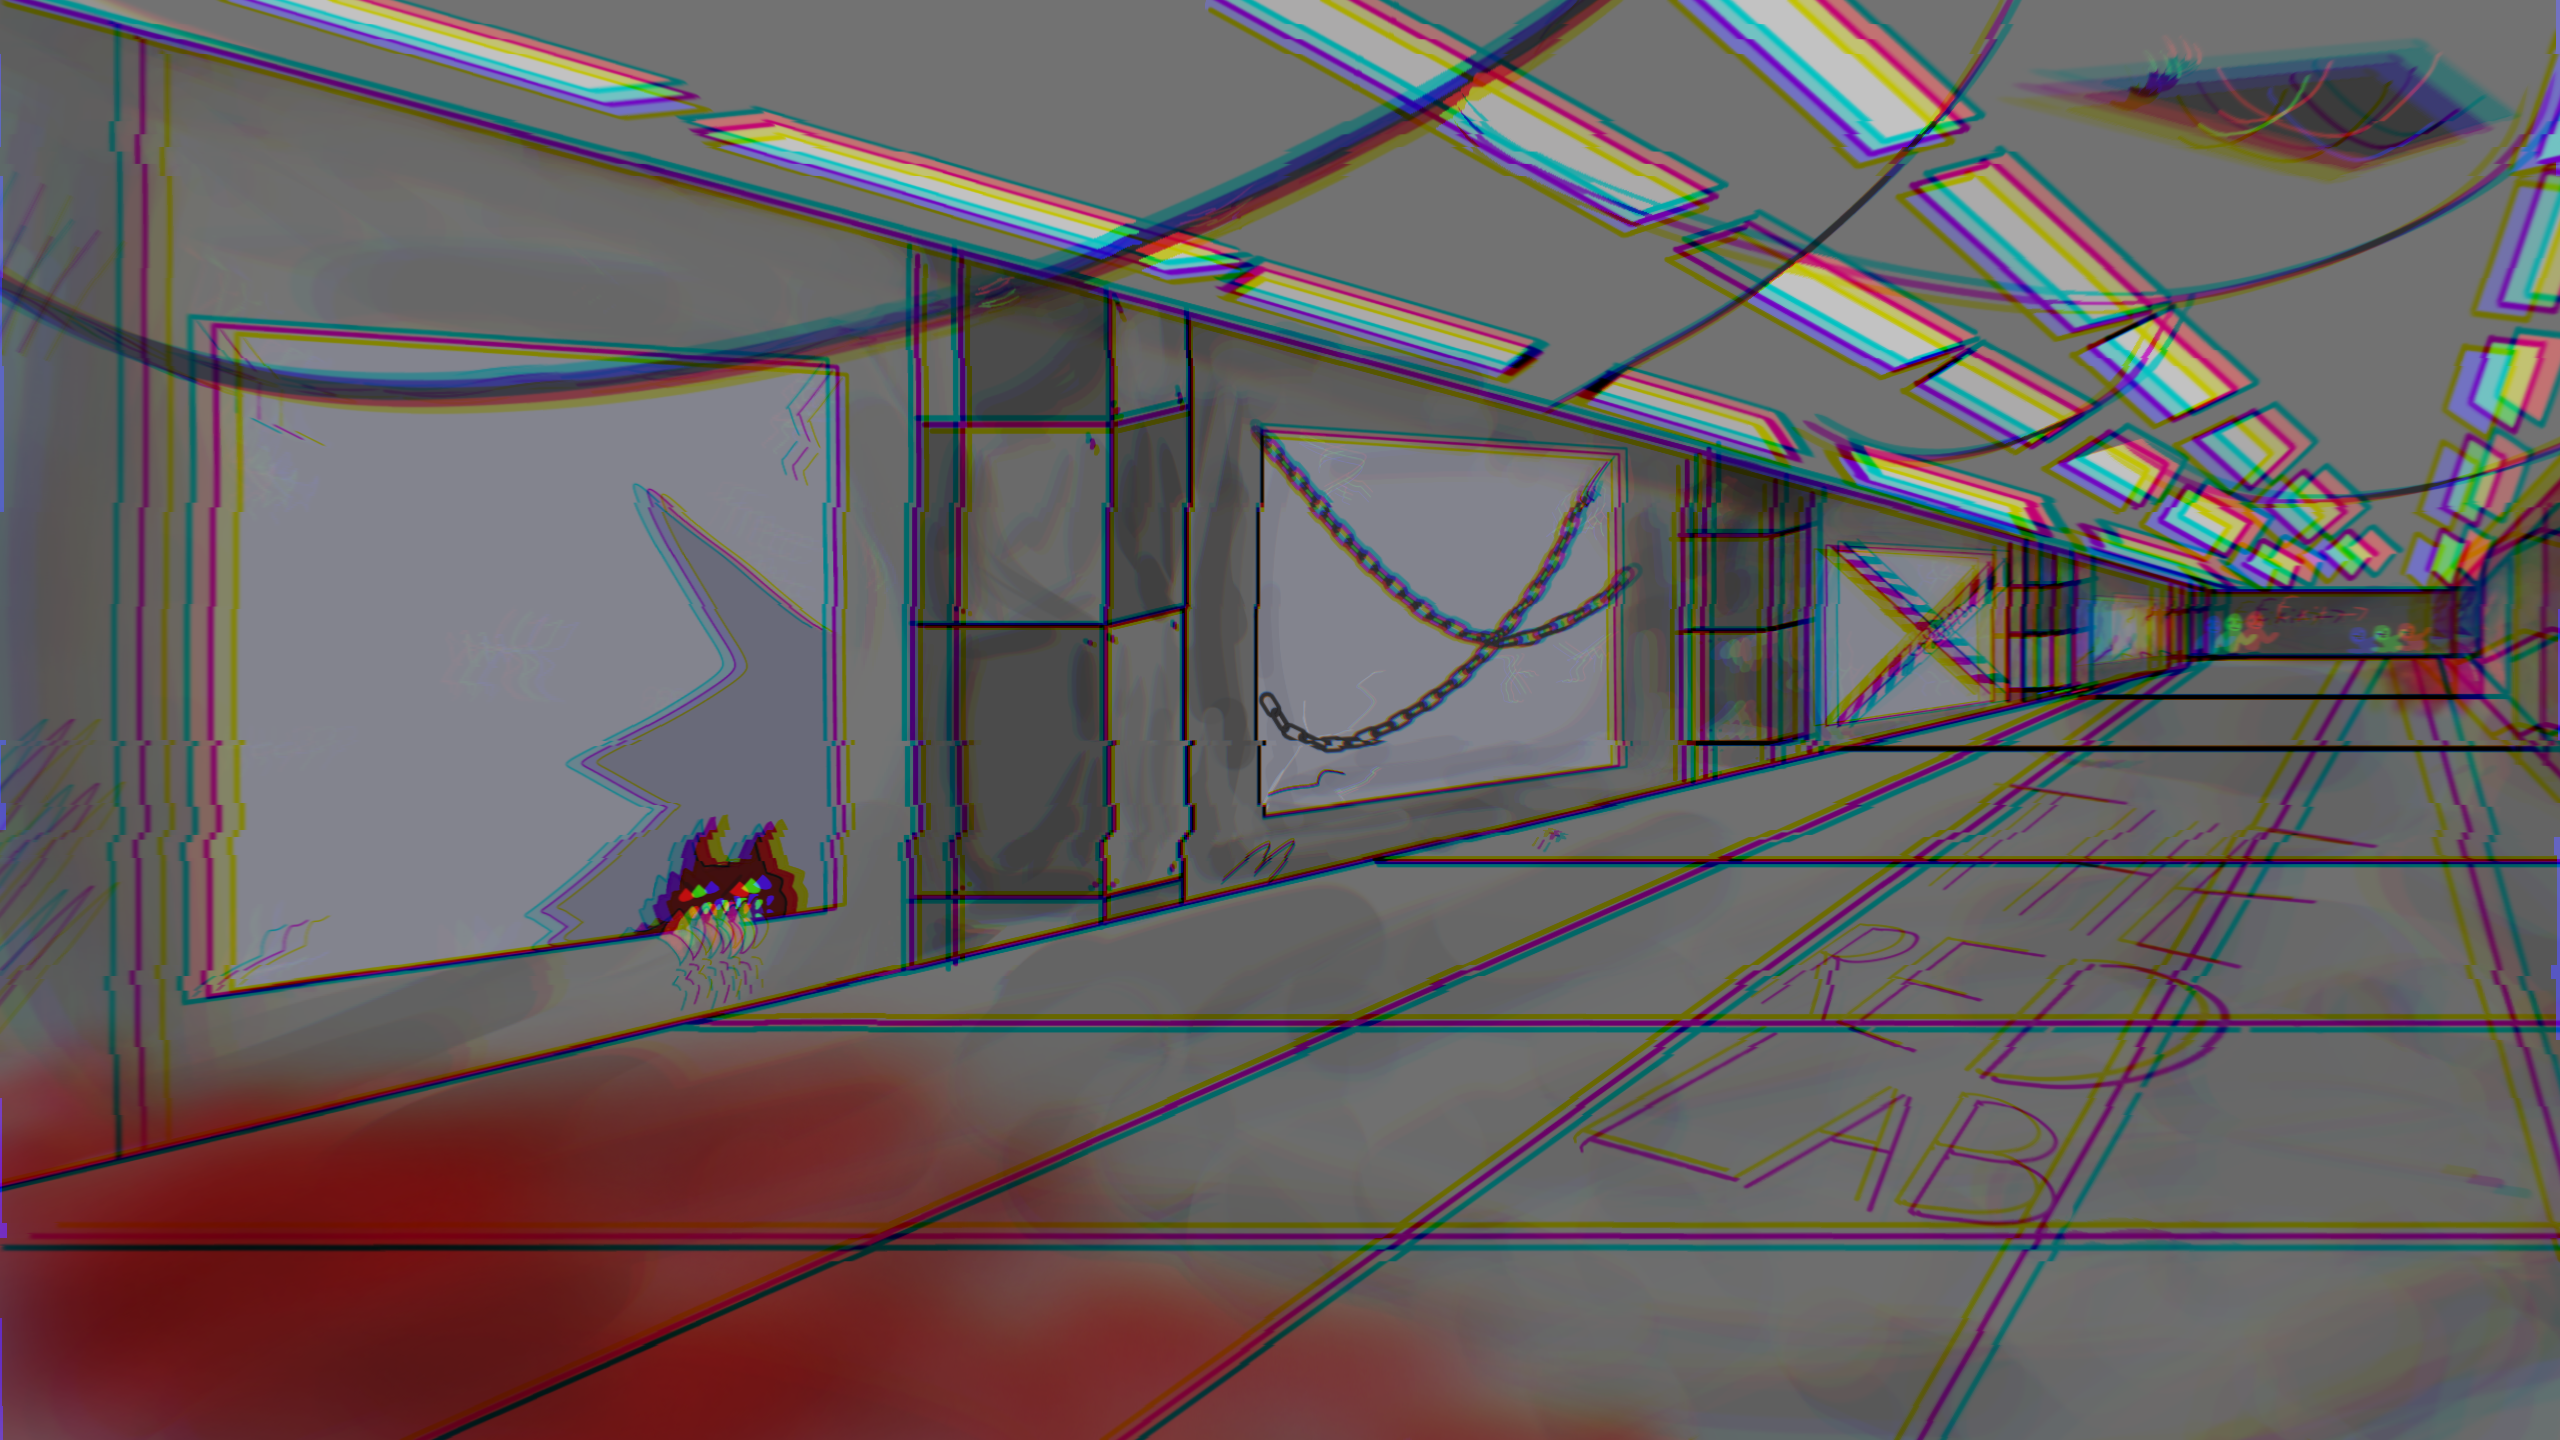 The red lab vr